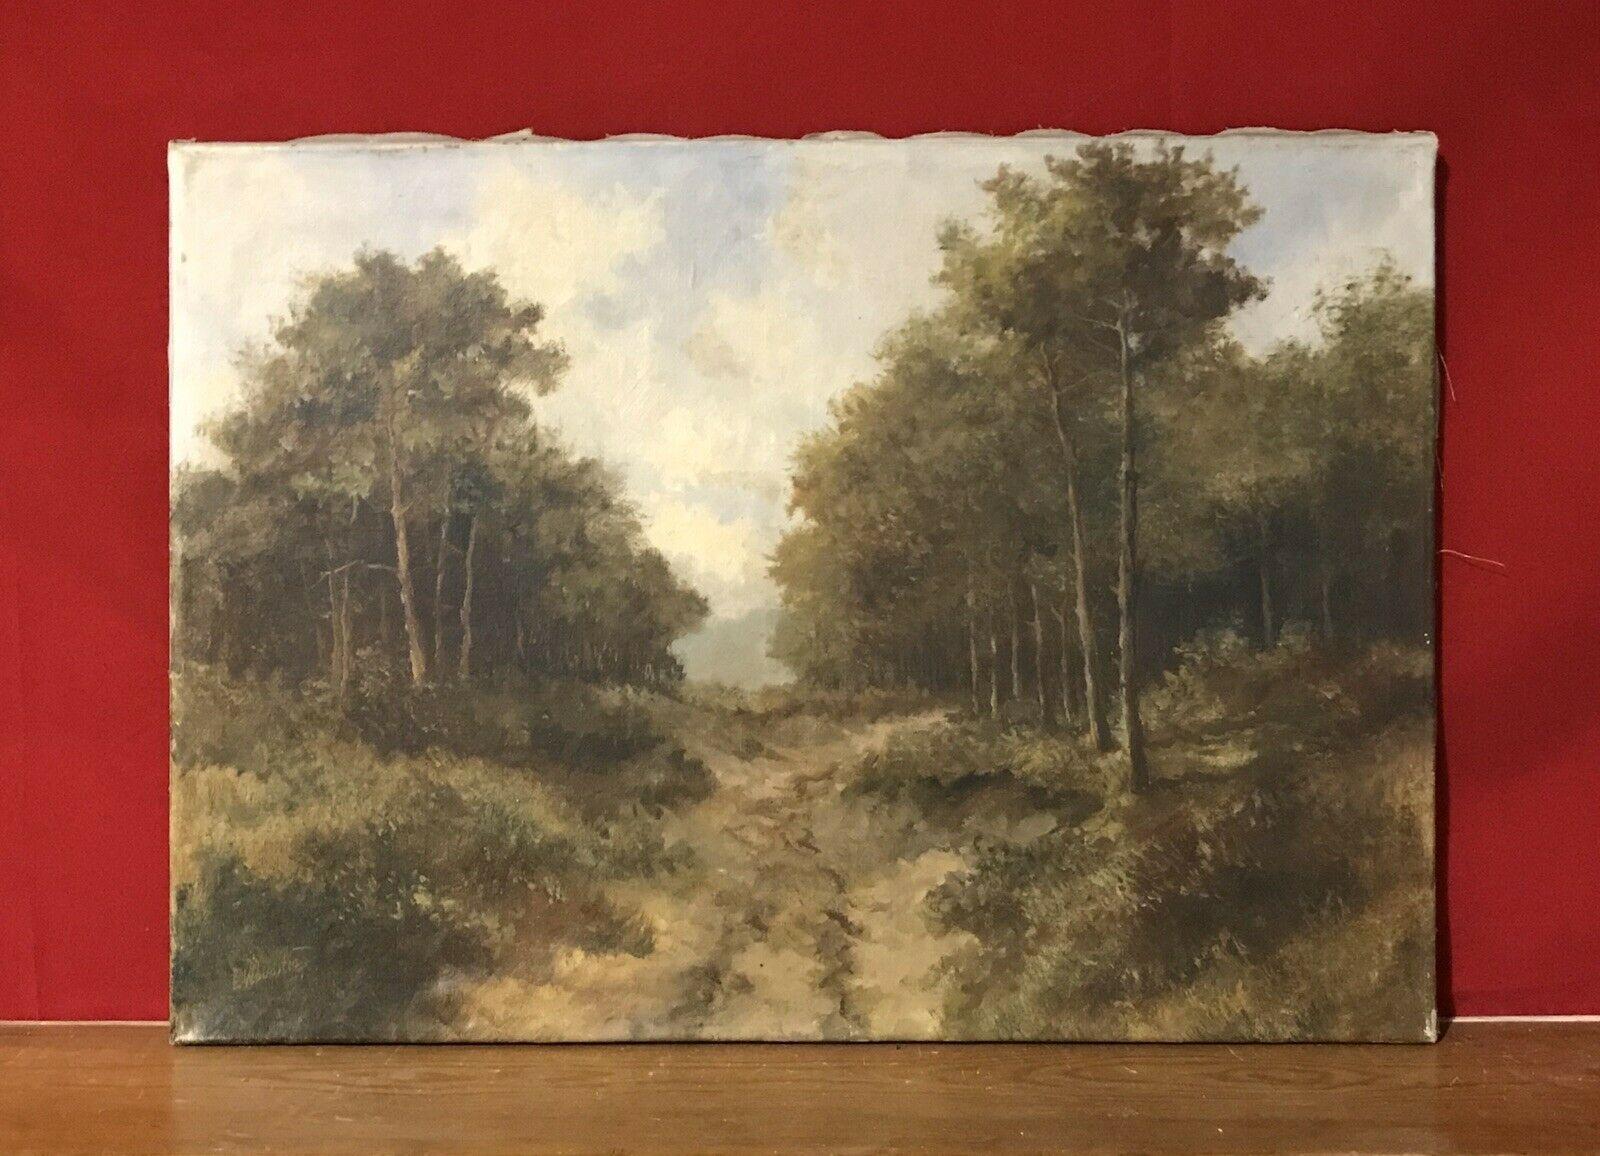 ANTIQUE BRITISH OIL PAINTING - RURAL COUNTRY LANE LANDSCAPE - SIGNED - Painting by Unknown